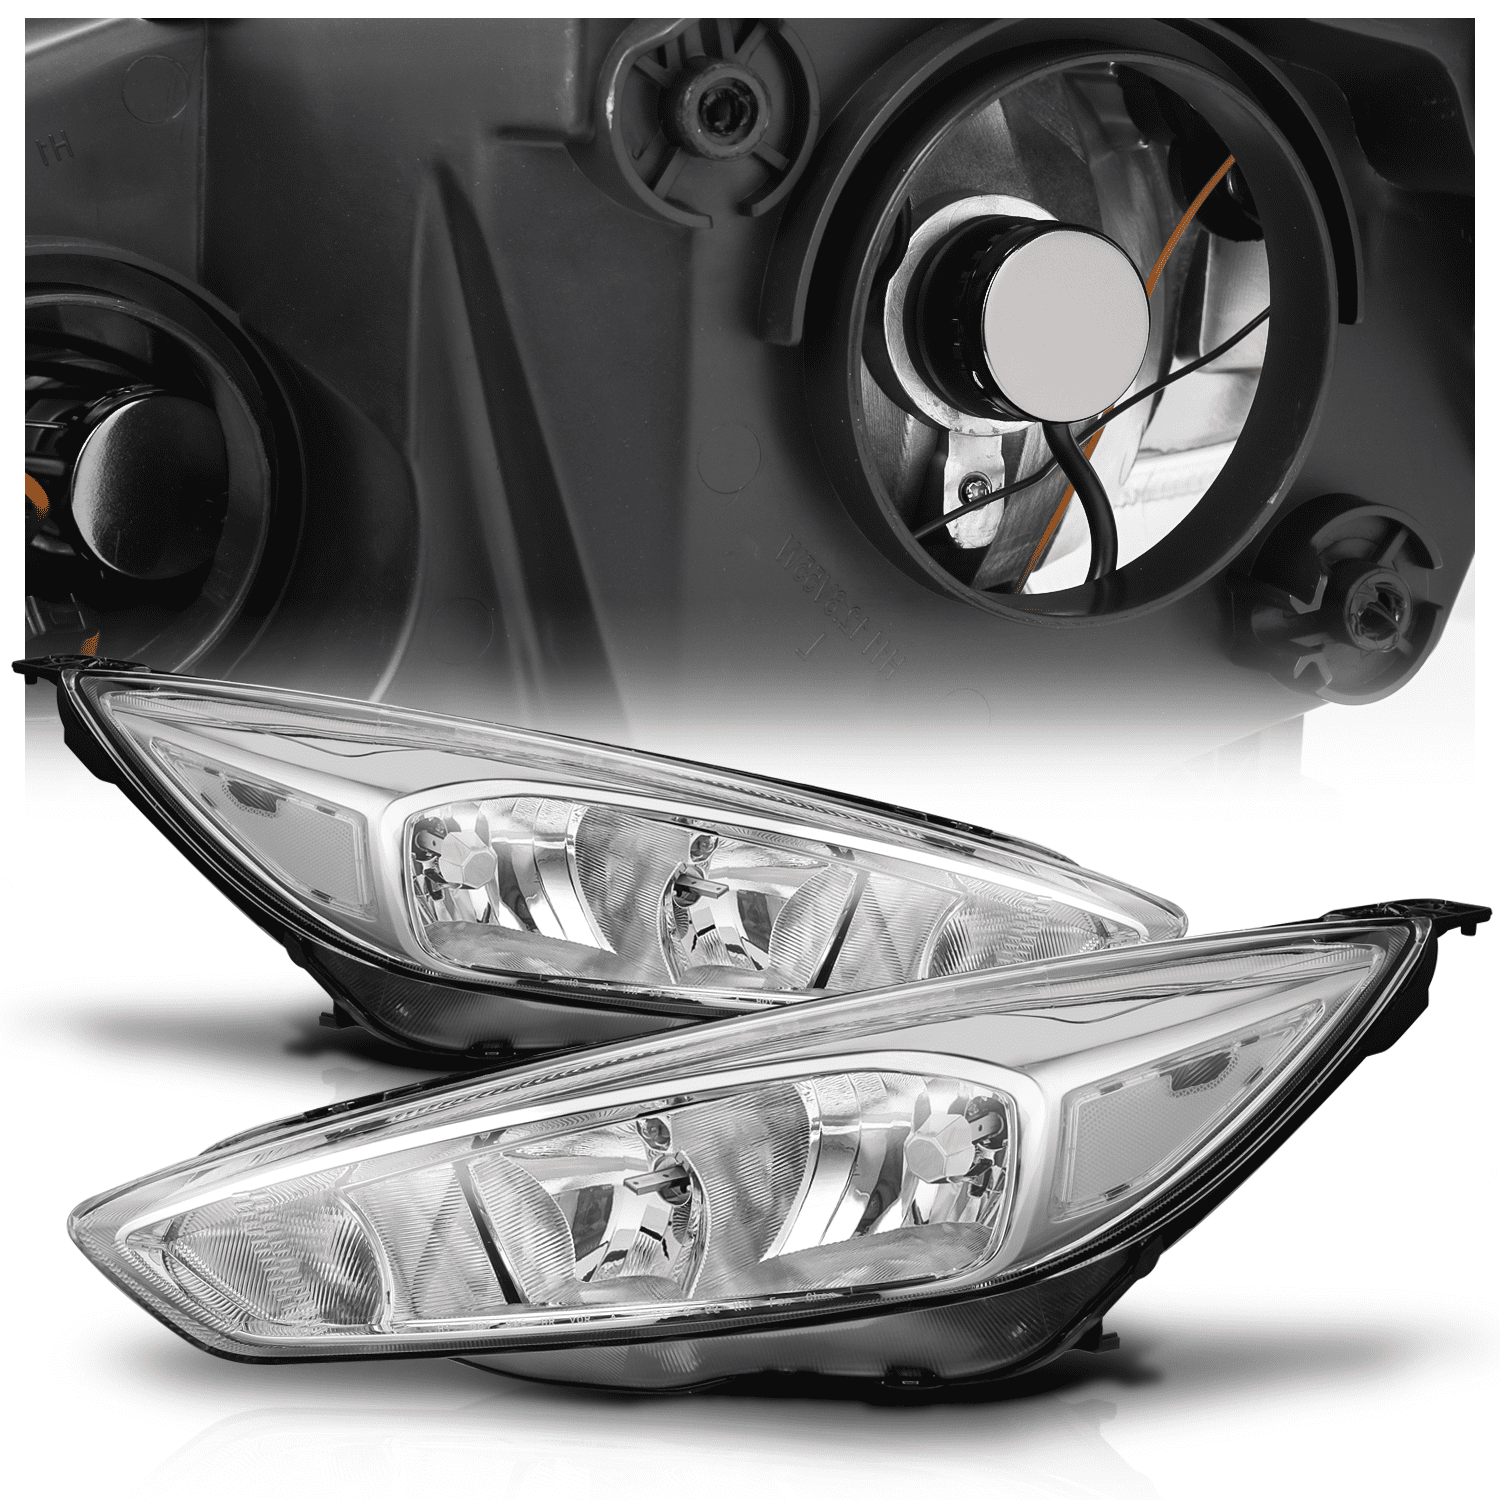 M-AUTO Headlight Assembly with 2 Pairs Pre-Assembled LED Bulbs for